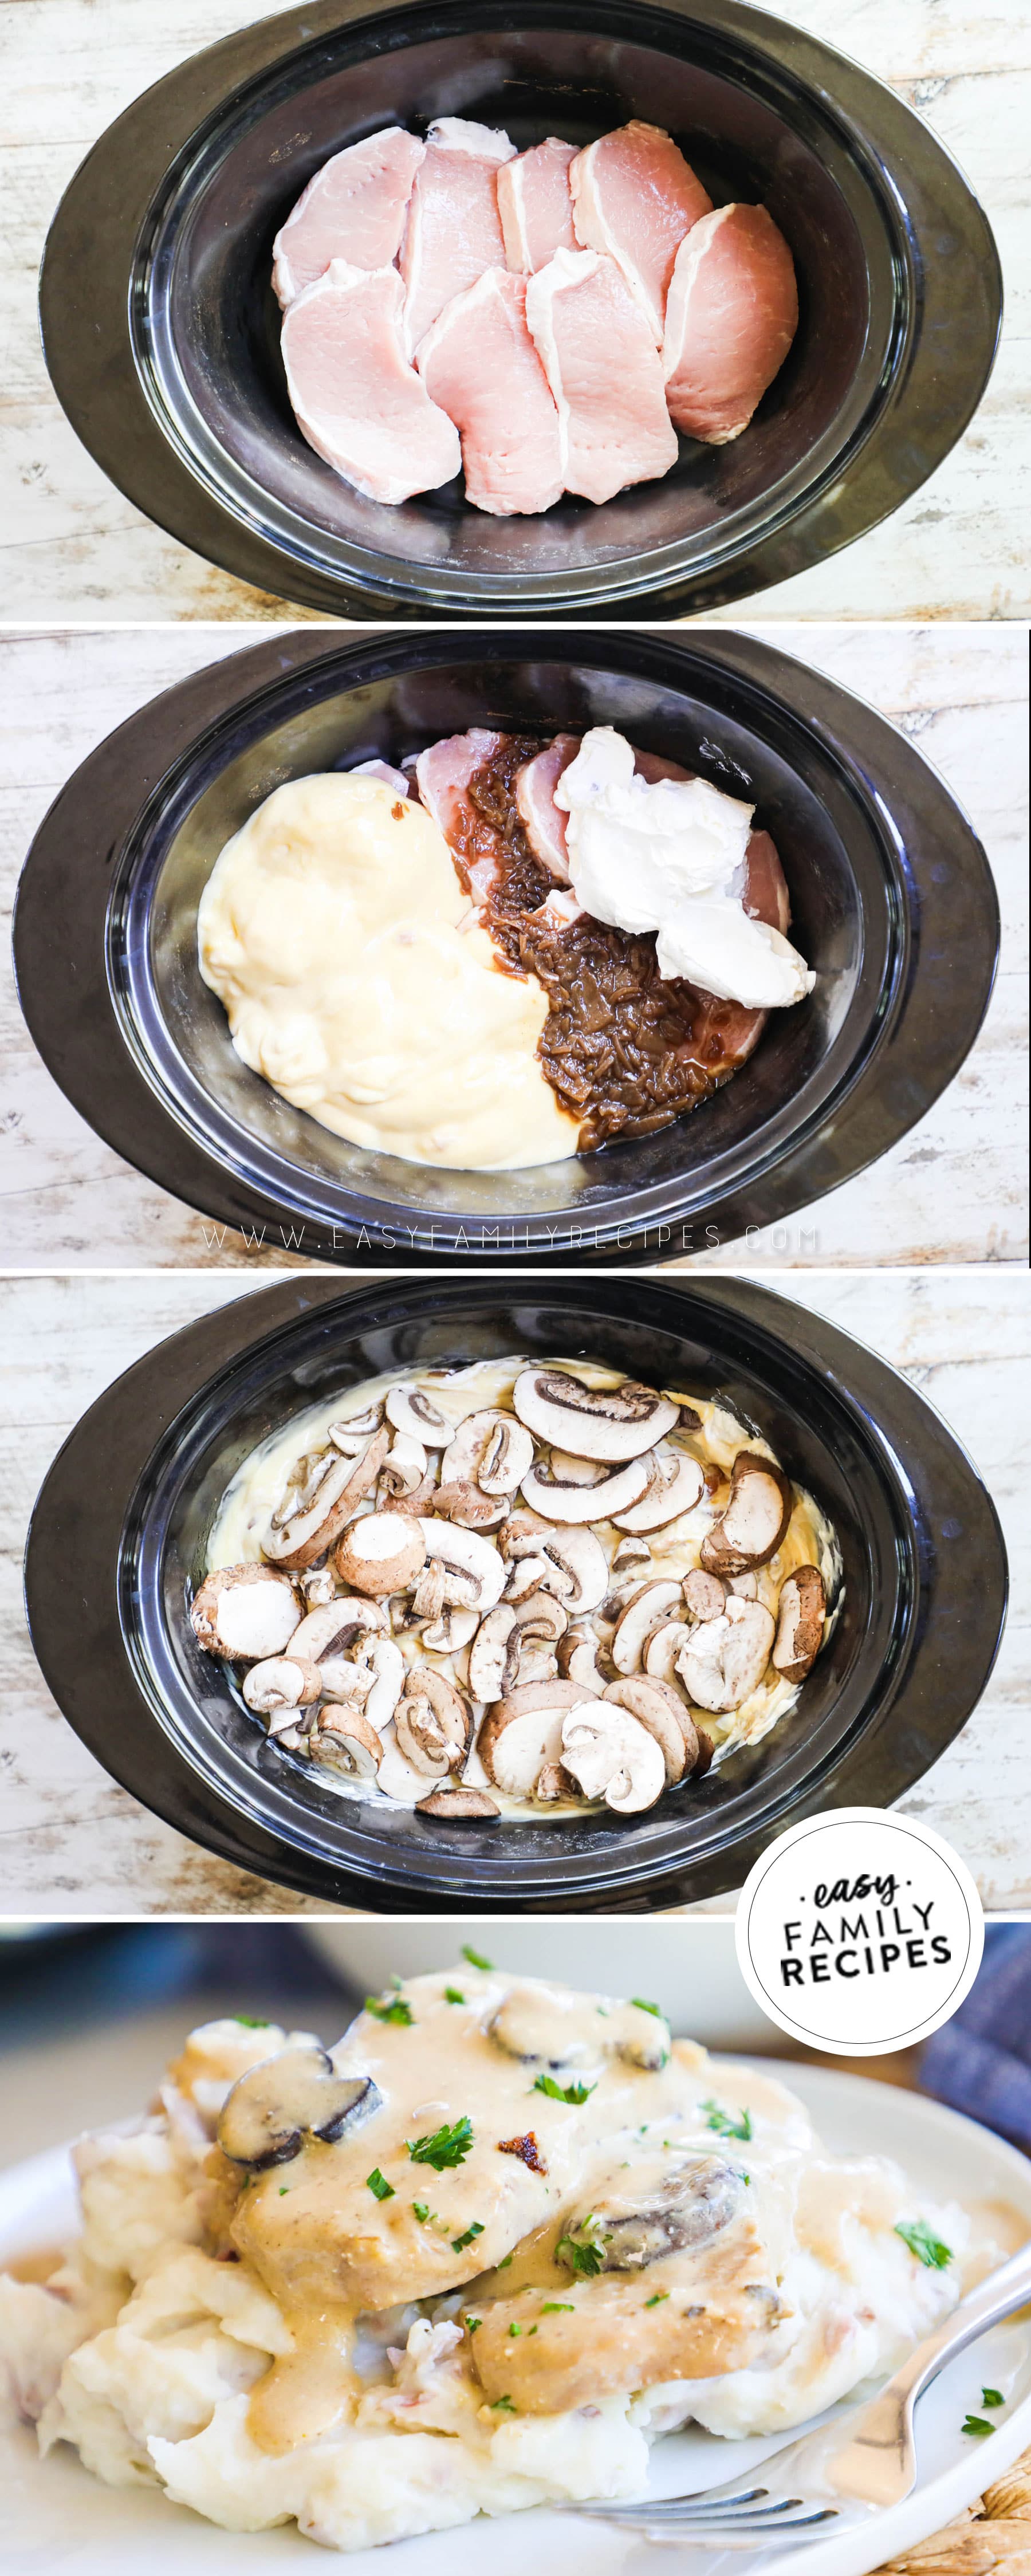 How to make slow cooker smothered pork chops 1)Add pork to Crock Pot 2)Add in condensed soups, sour cream, and mushrooms 3)Add sliced mushrooms 4)Cook until tender and creamy